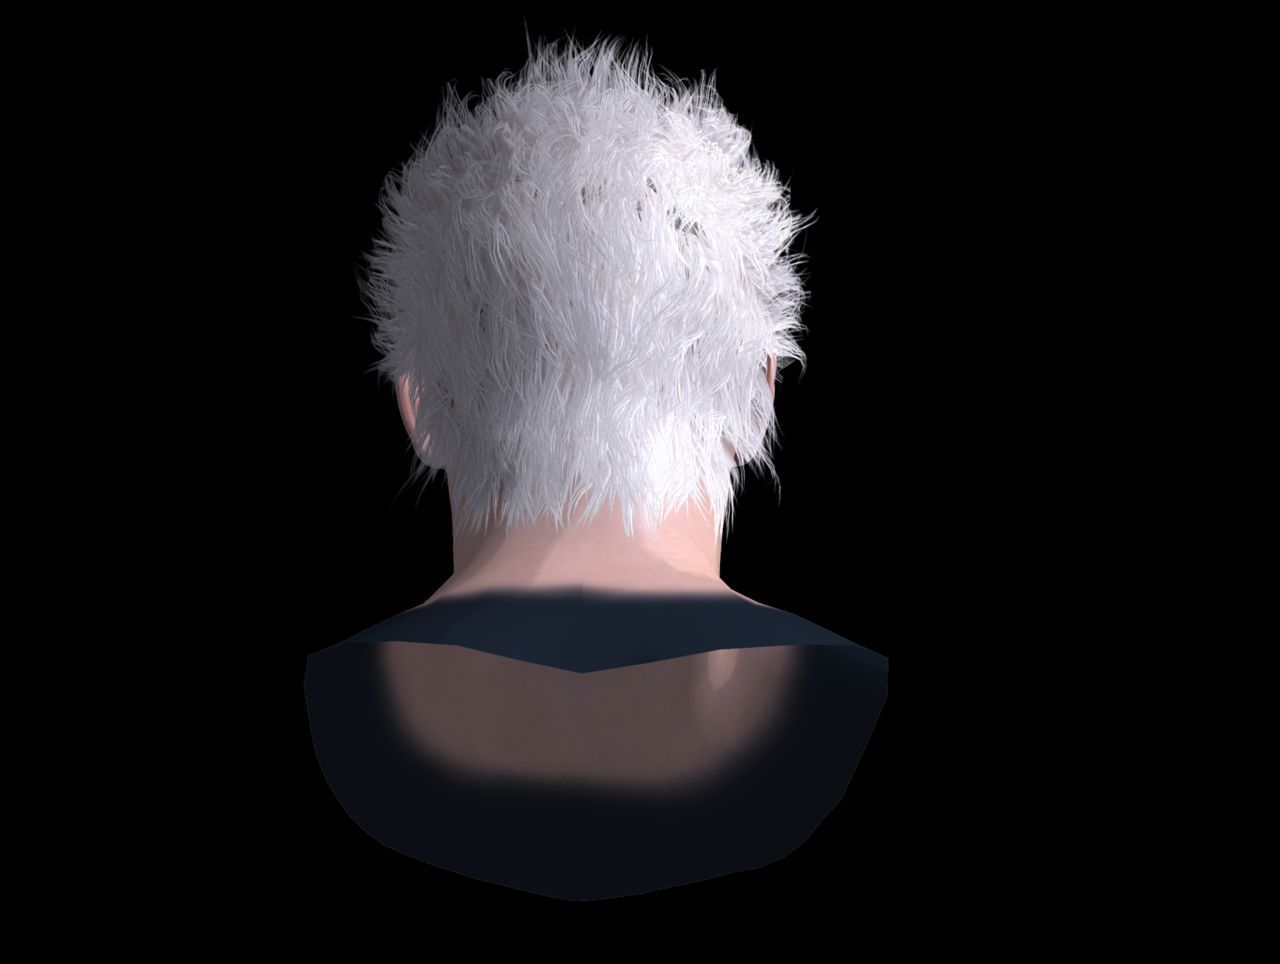 [J.A.] DMC5 | Vergil Head Reference PNG 25